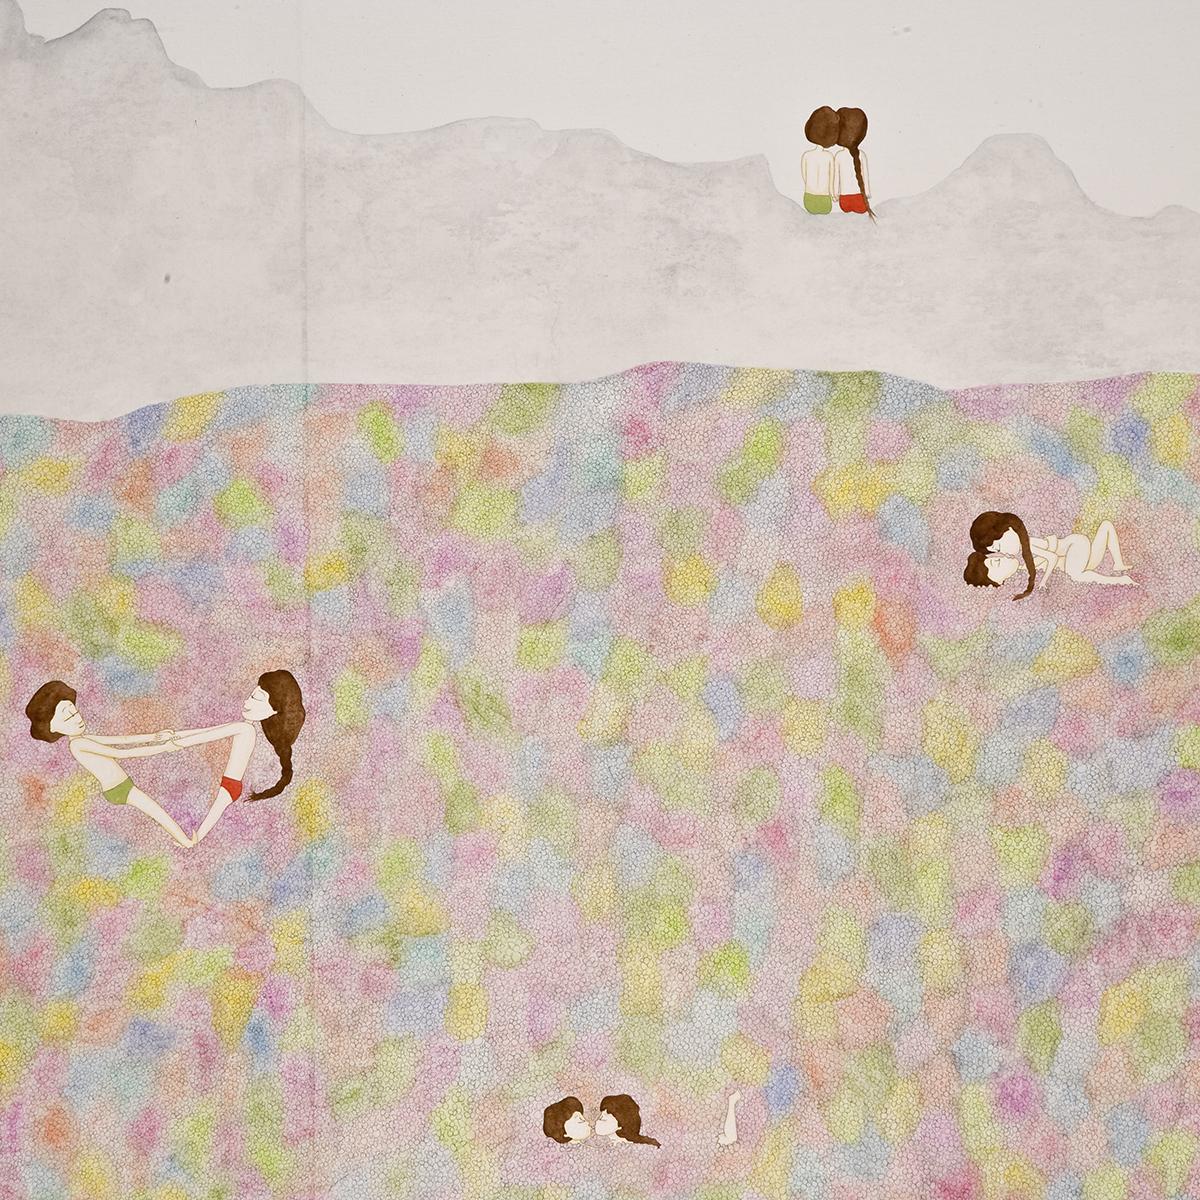 Detail of artwork by Kyung Jeon titled Chapter 1-They Share one Heart, 2008, Gouache, graphite, watercolor on rice paper on canvas, 43.75 x 69.75 inches, 111.1 x 177.2 cm